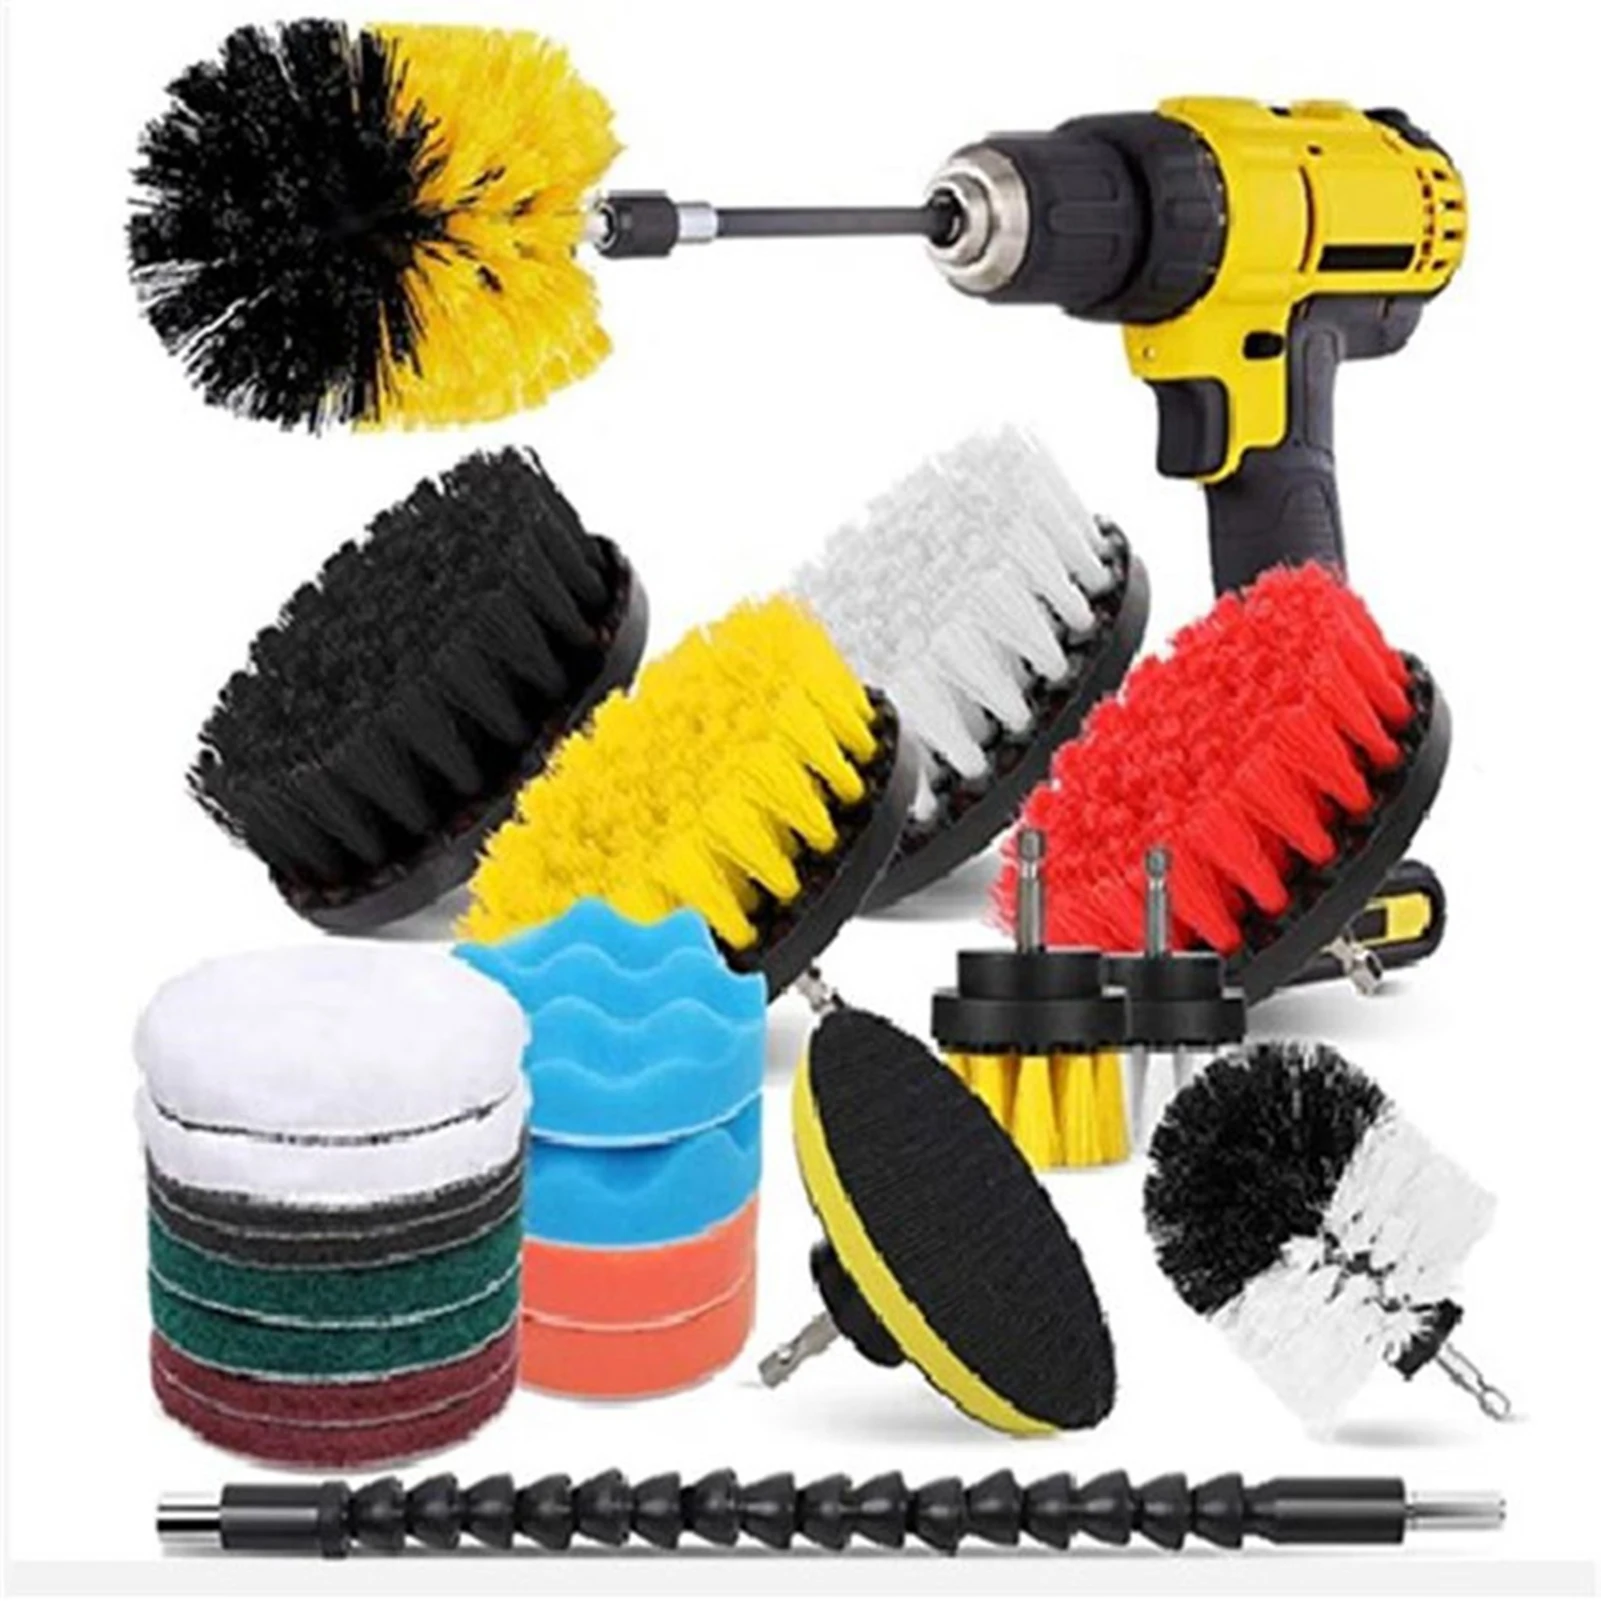 

Electric Drill Brush Cleaning Brush Set Multipurpose Scrubber Kit For Scrubbing Bathtub Grout Bathroom Floor Toilet And Carpet